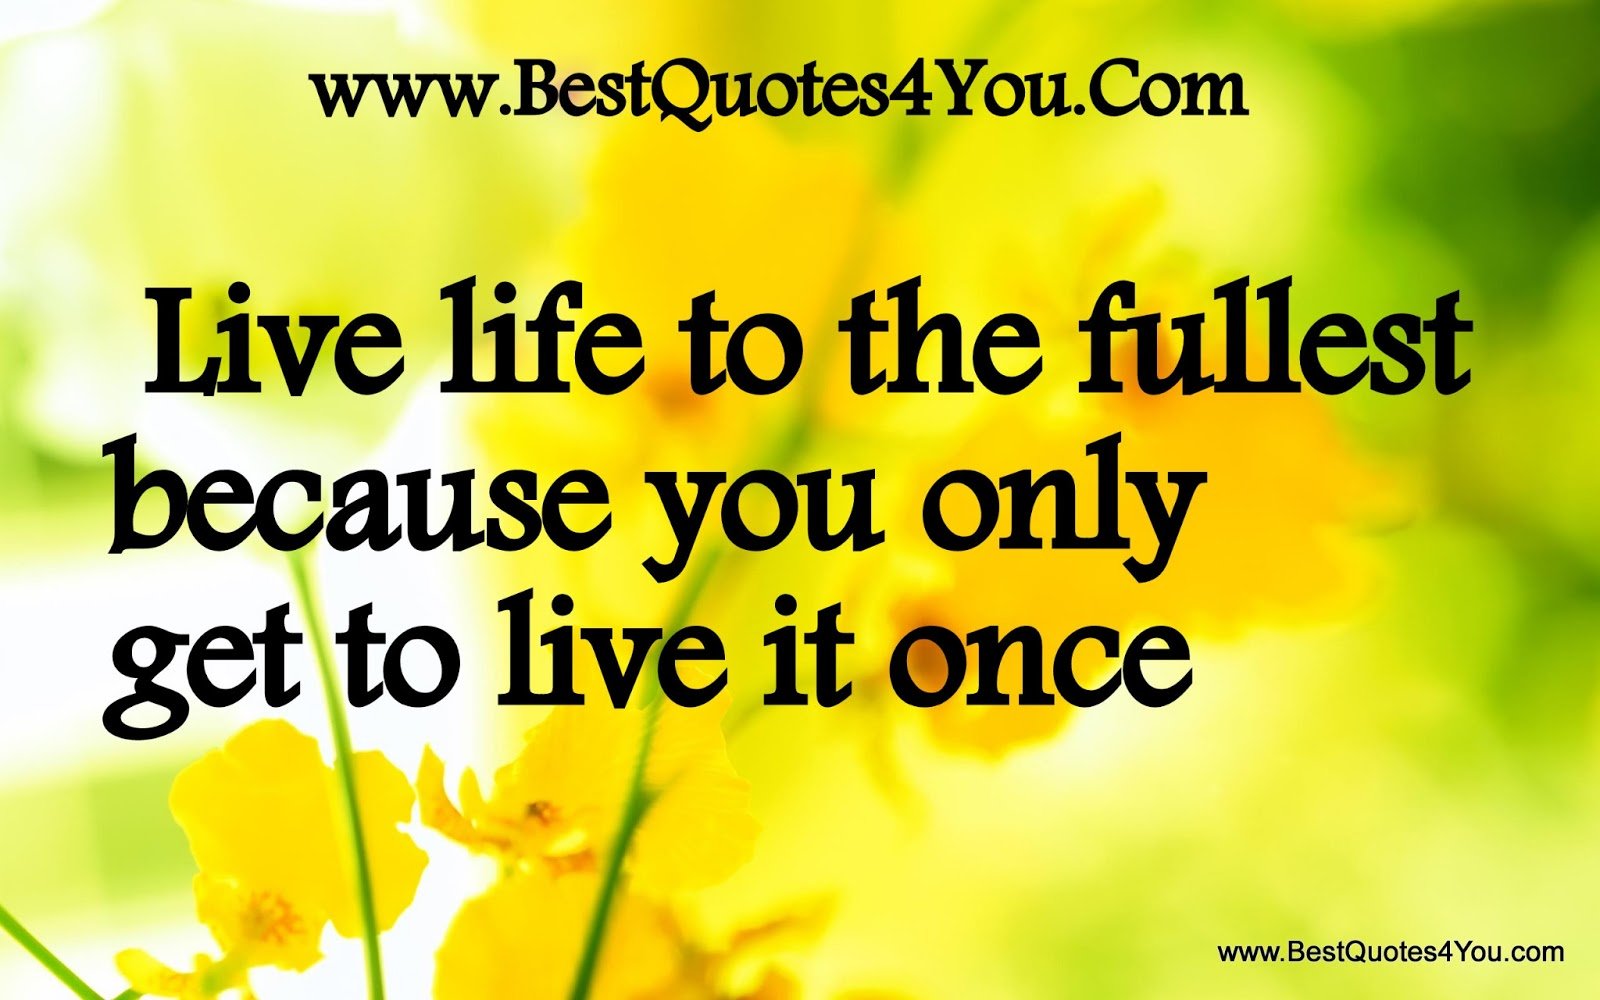 Quotes About Living Your Life To The Fullest. QuotesGram